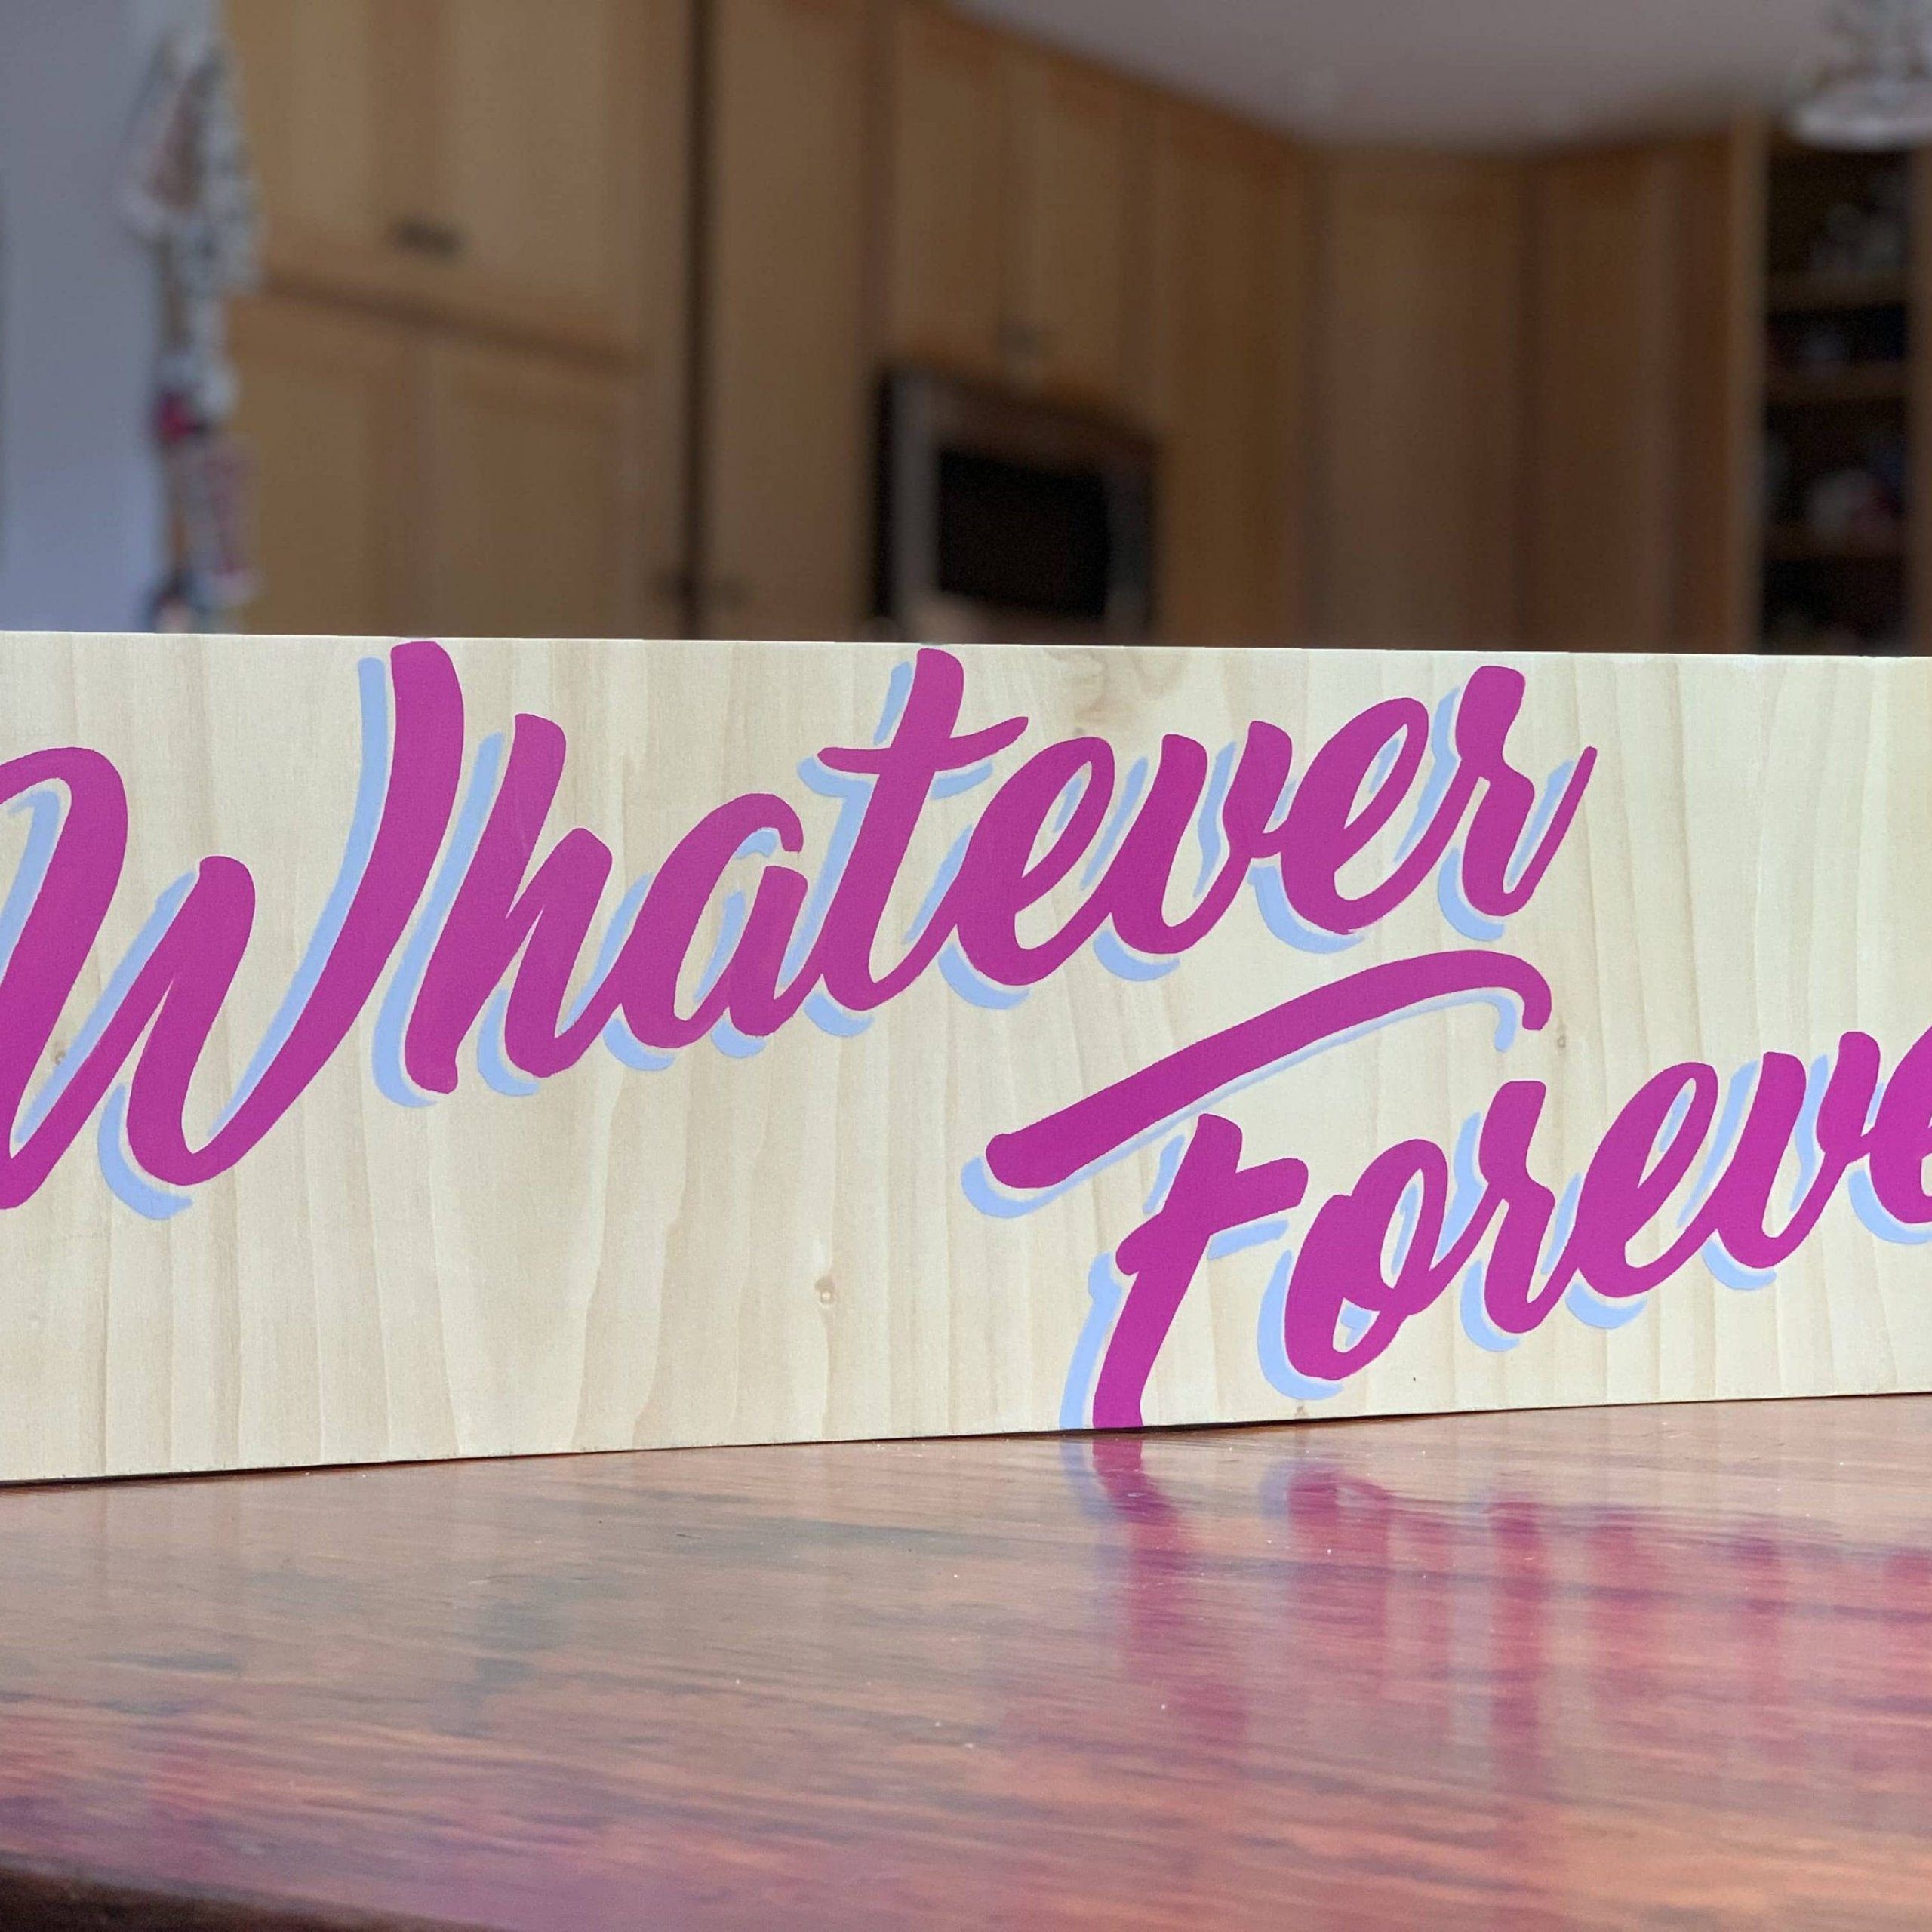 Whatever Forever Wooden Sign Funny Sign Fun Wall Art Home | Etsy Regarding Fun Wall Art (View 8 of 15)